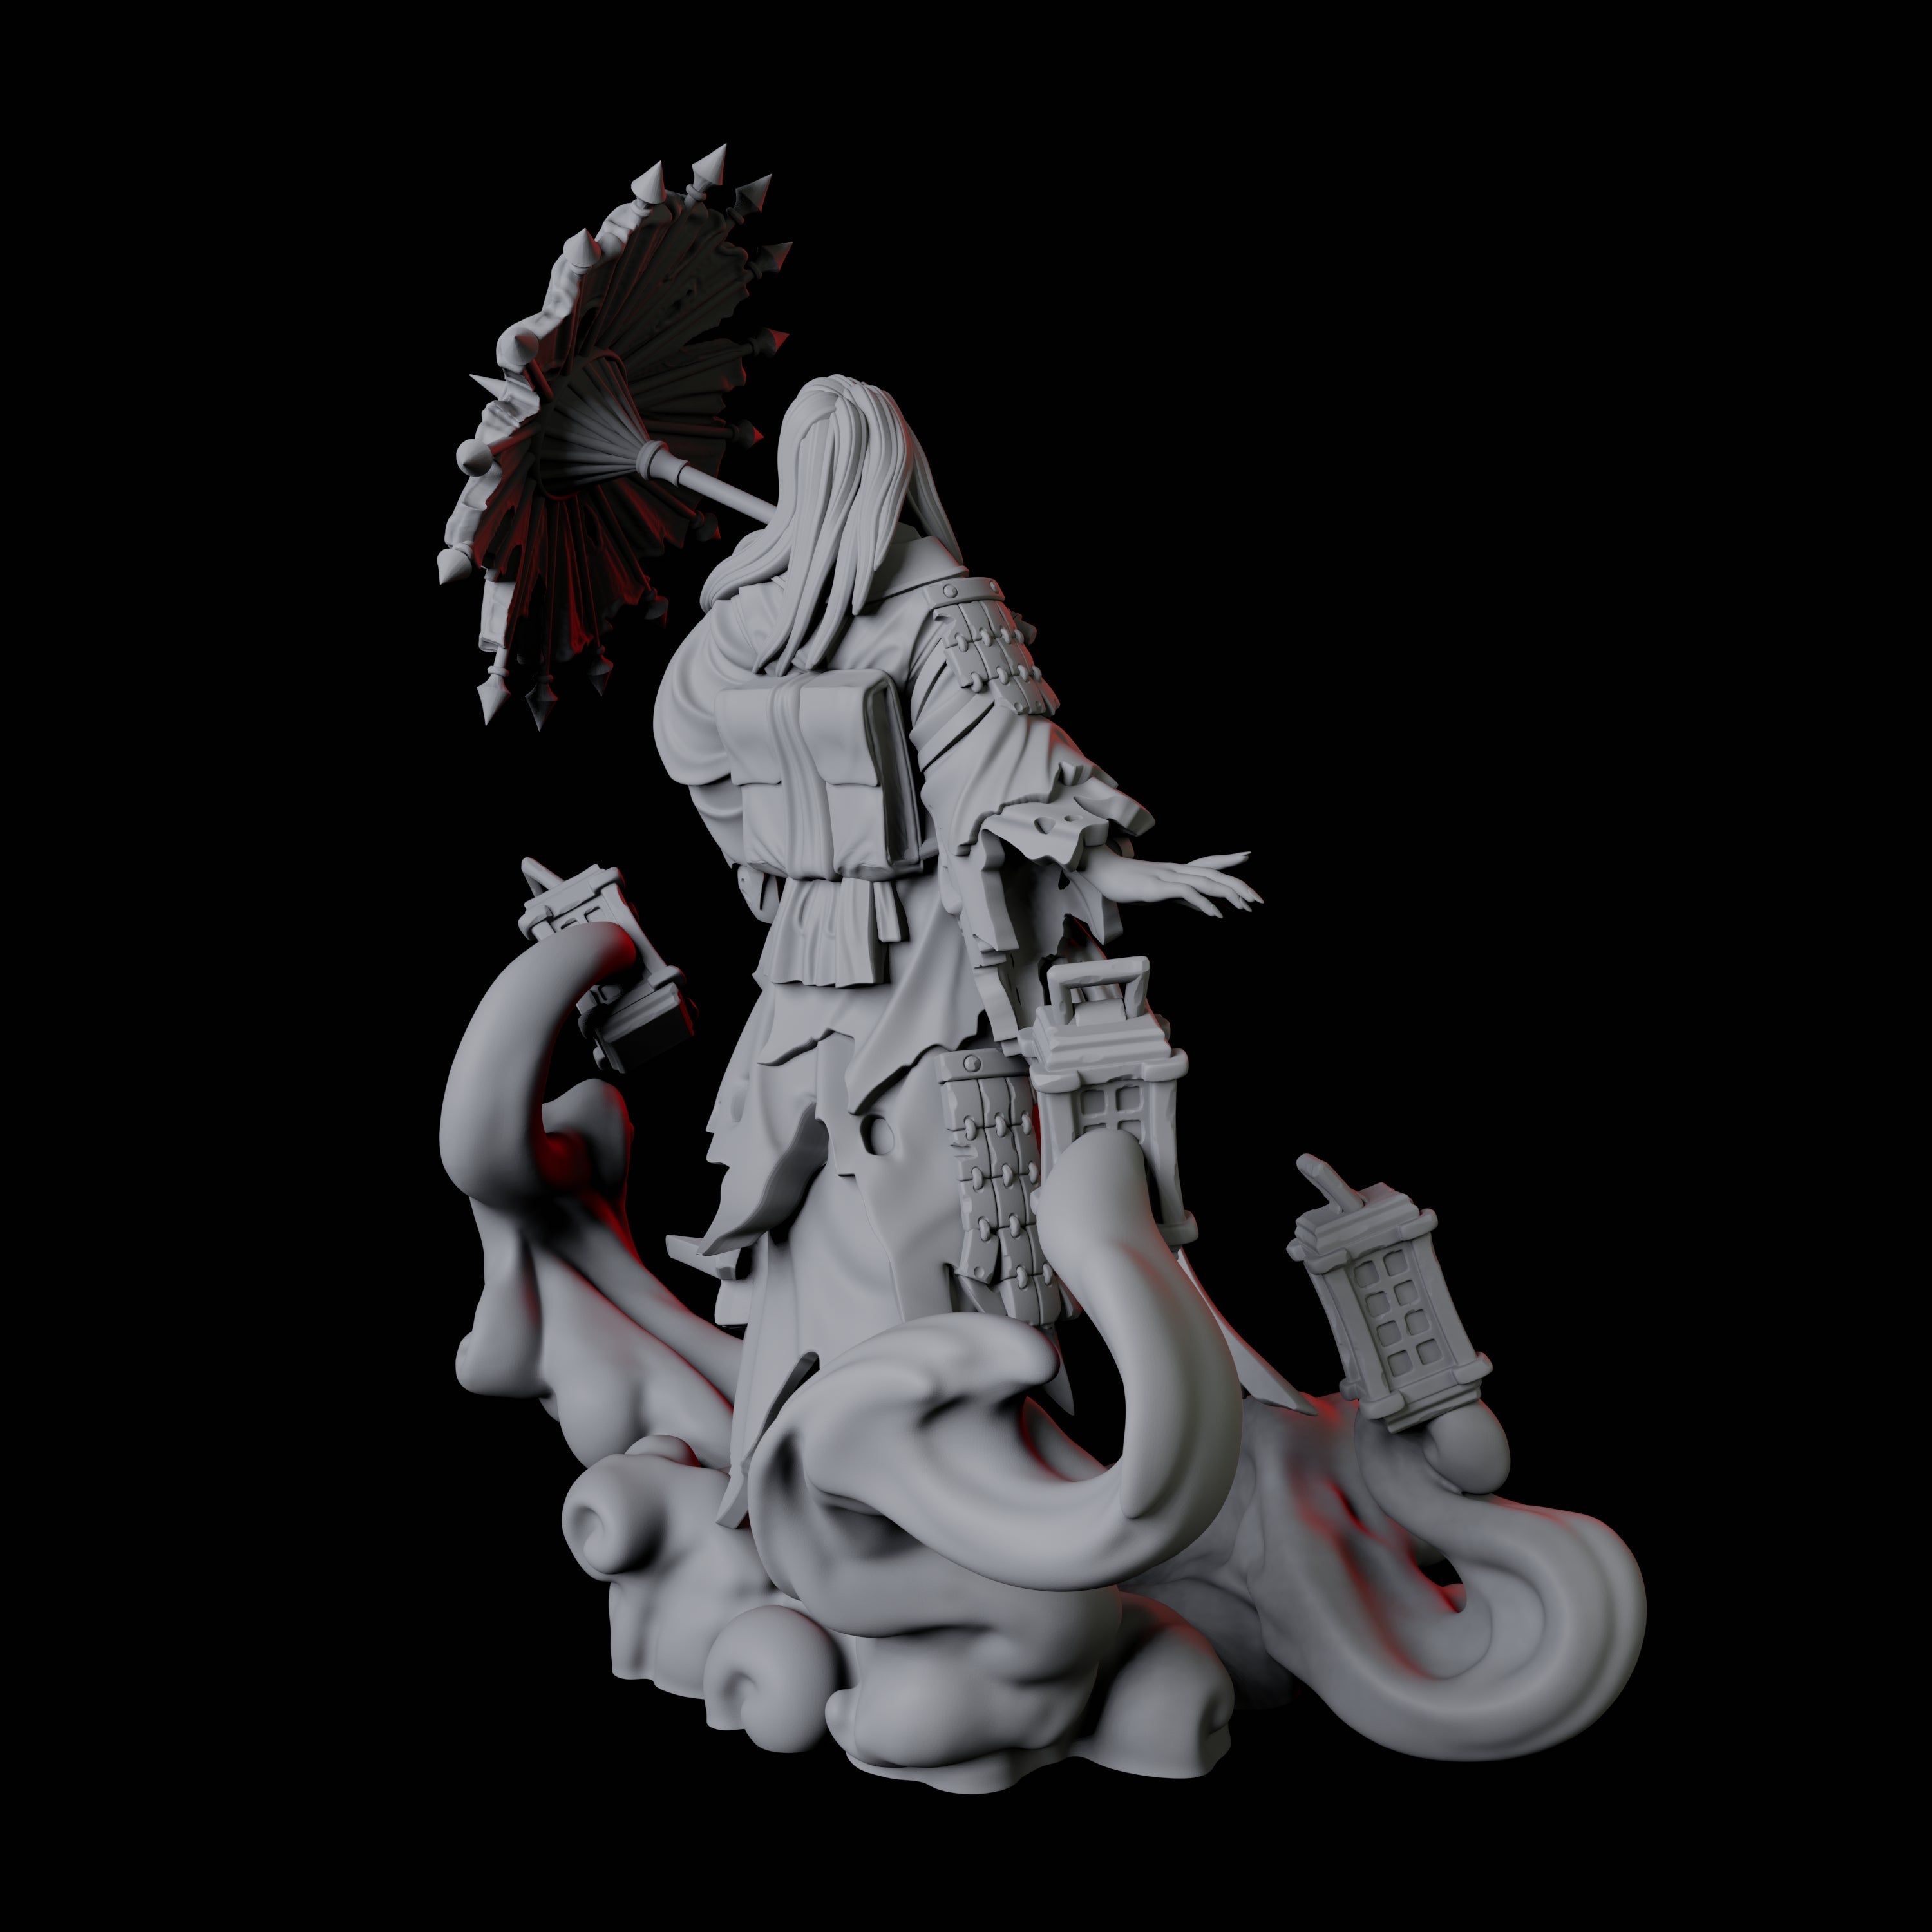 Mysterious Geisha Sorcerer A Miniature for Dungeons and Dragons, Pathfinder or other TTRPGs